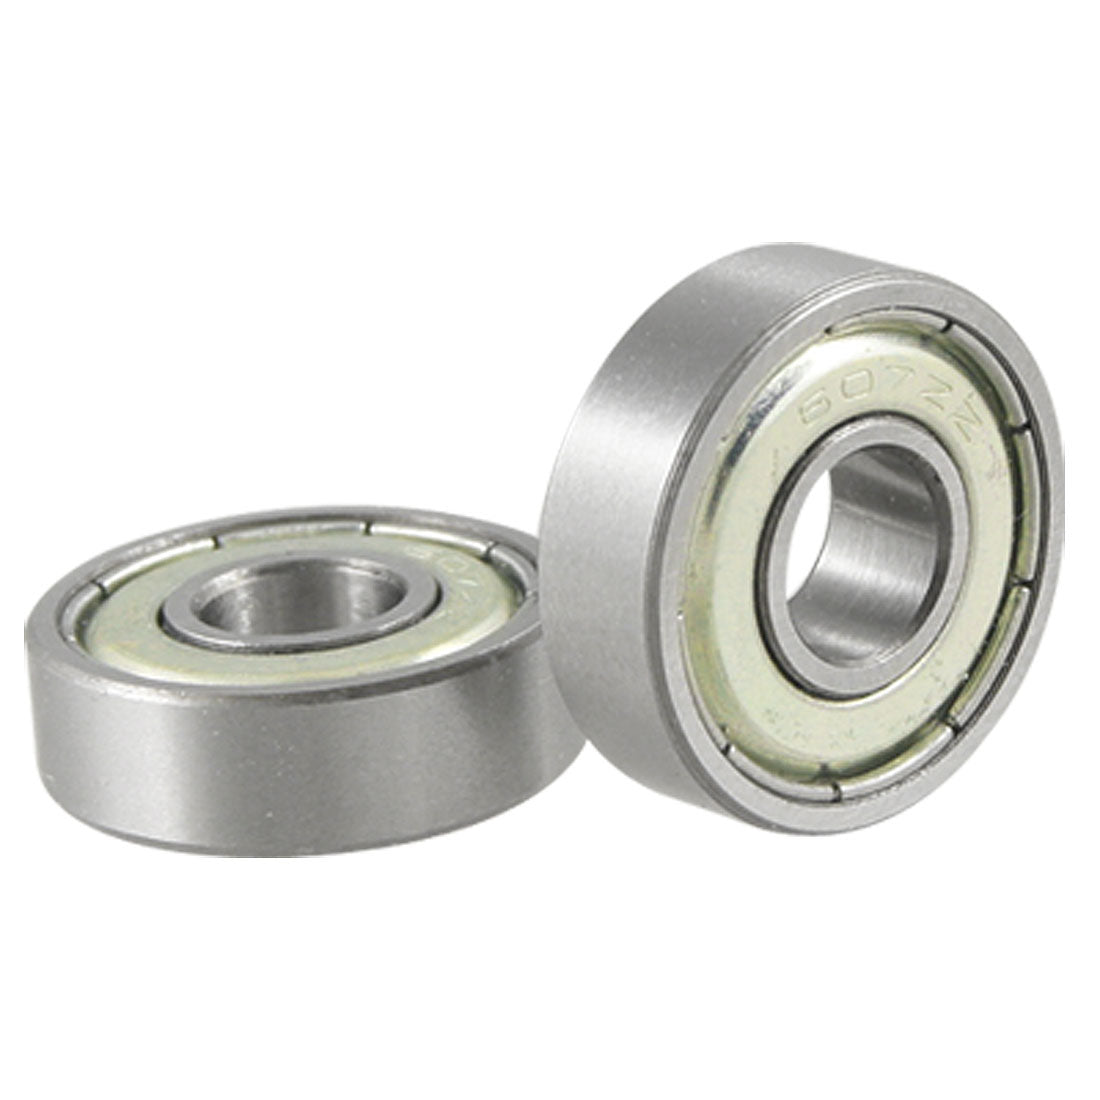 uxcell Uxcell 2 Pcs 7 x 19 x 6 607ZZ Double Shielded Deep Groove Ball Bearings